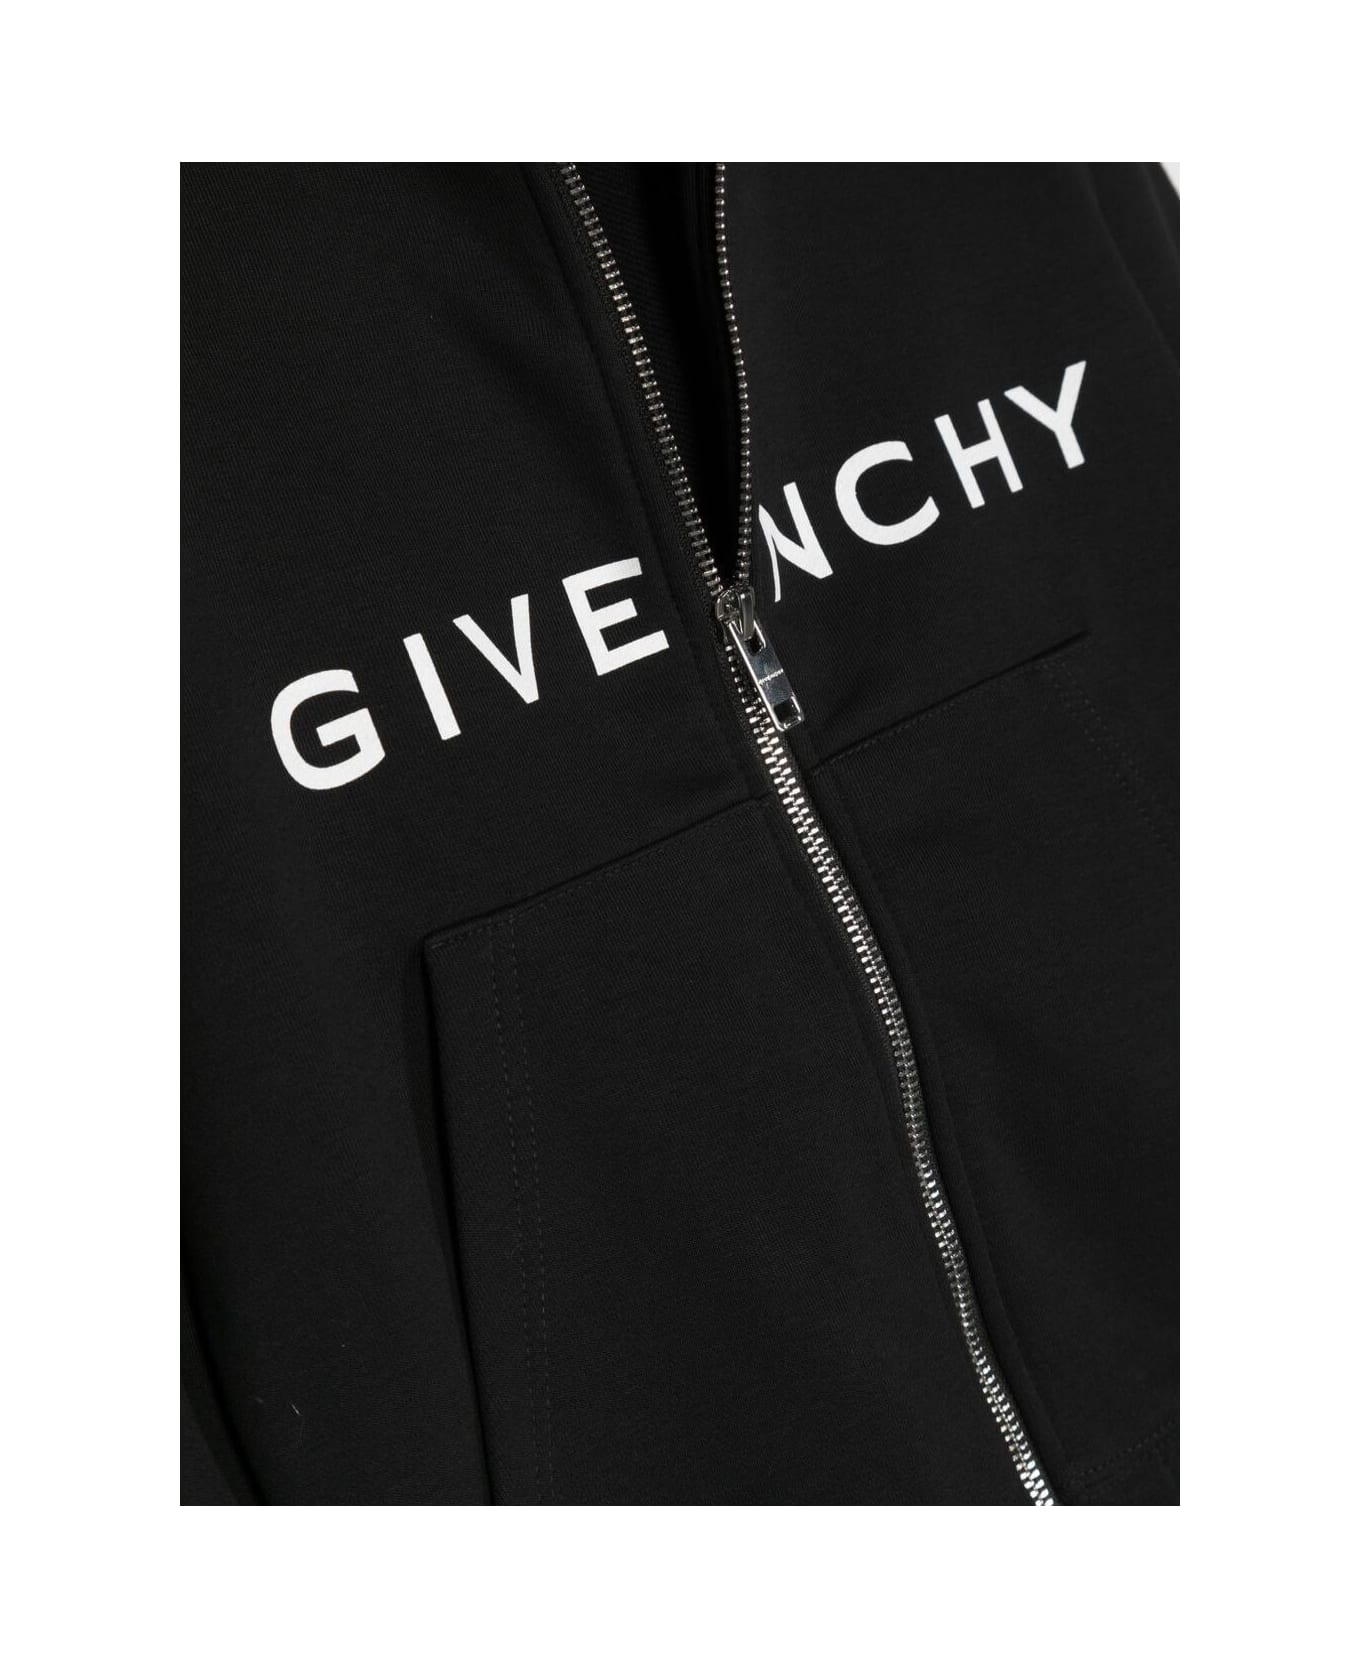 Givenchy Black Hooded Sweatshirt With Zip Fastening And Printed Logo In Cotton Blend Boy - Black